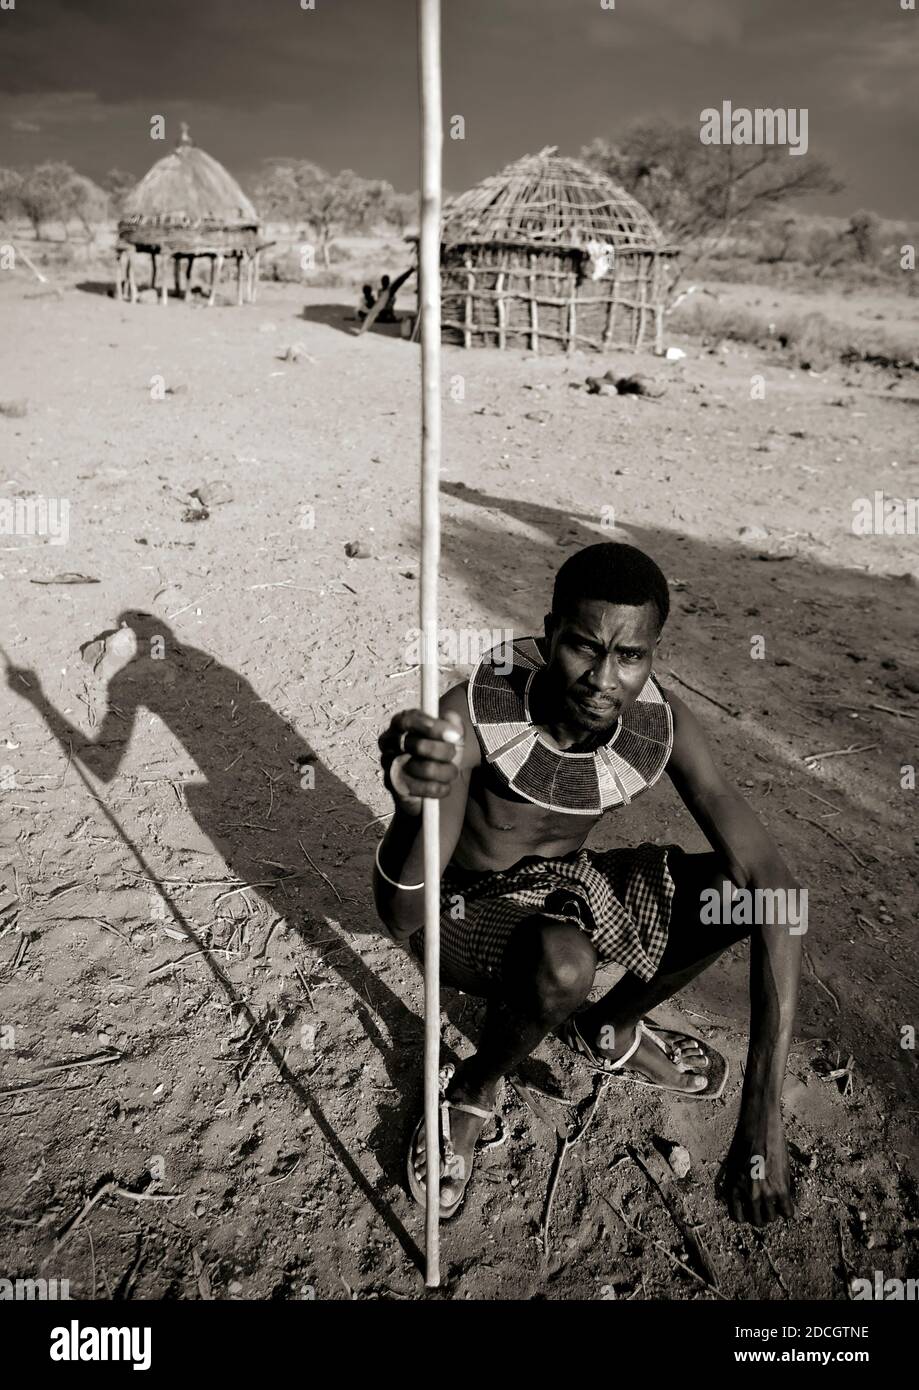 Portrait of a Pokot tribe man sit on his wooden pillow holding a spear, Baringo County, Baringo, Kenya Stock Photo